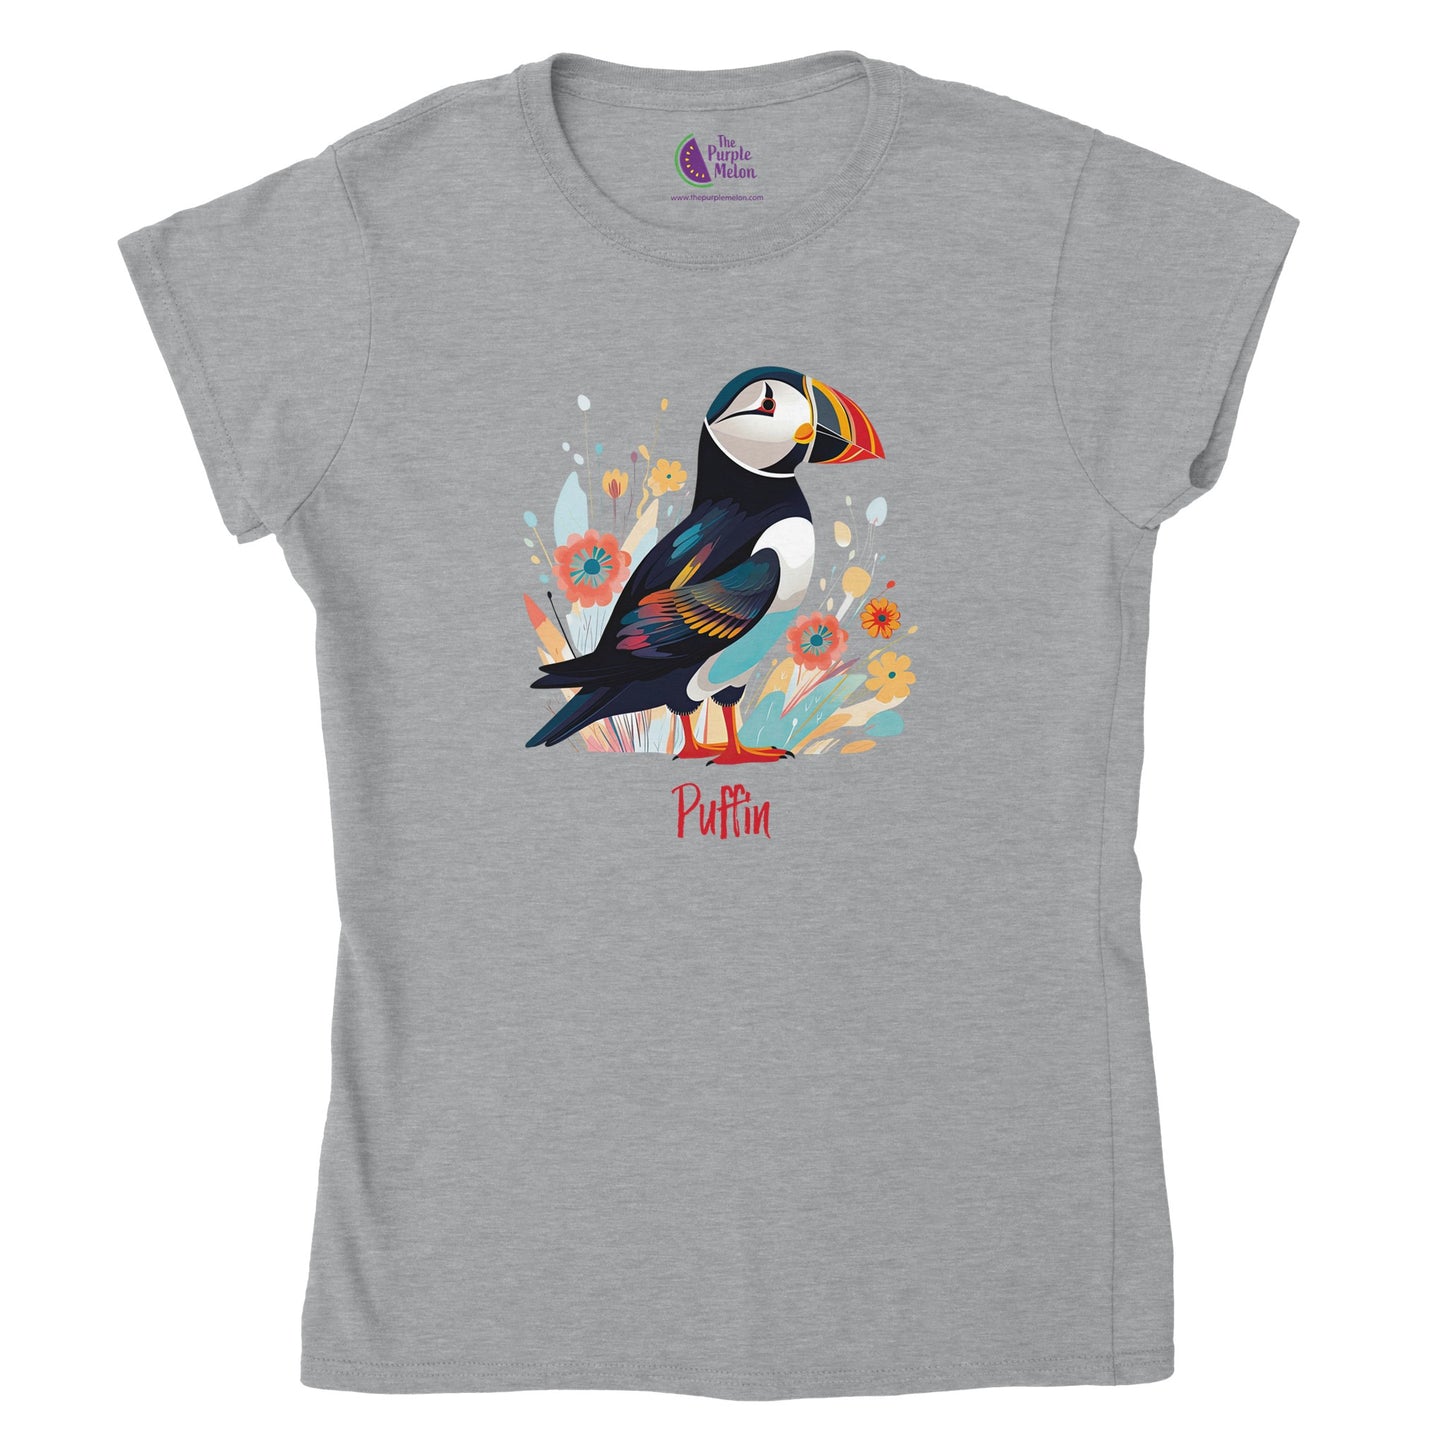 sports grey t-shirt with a puffin bird print